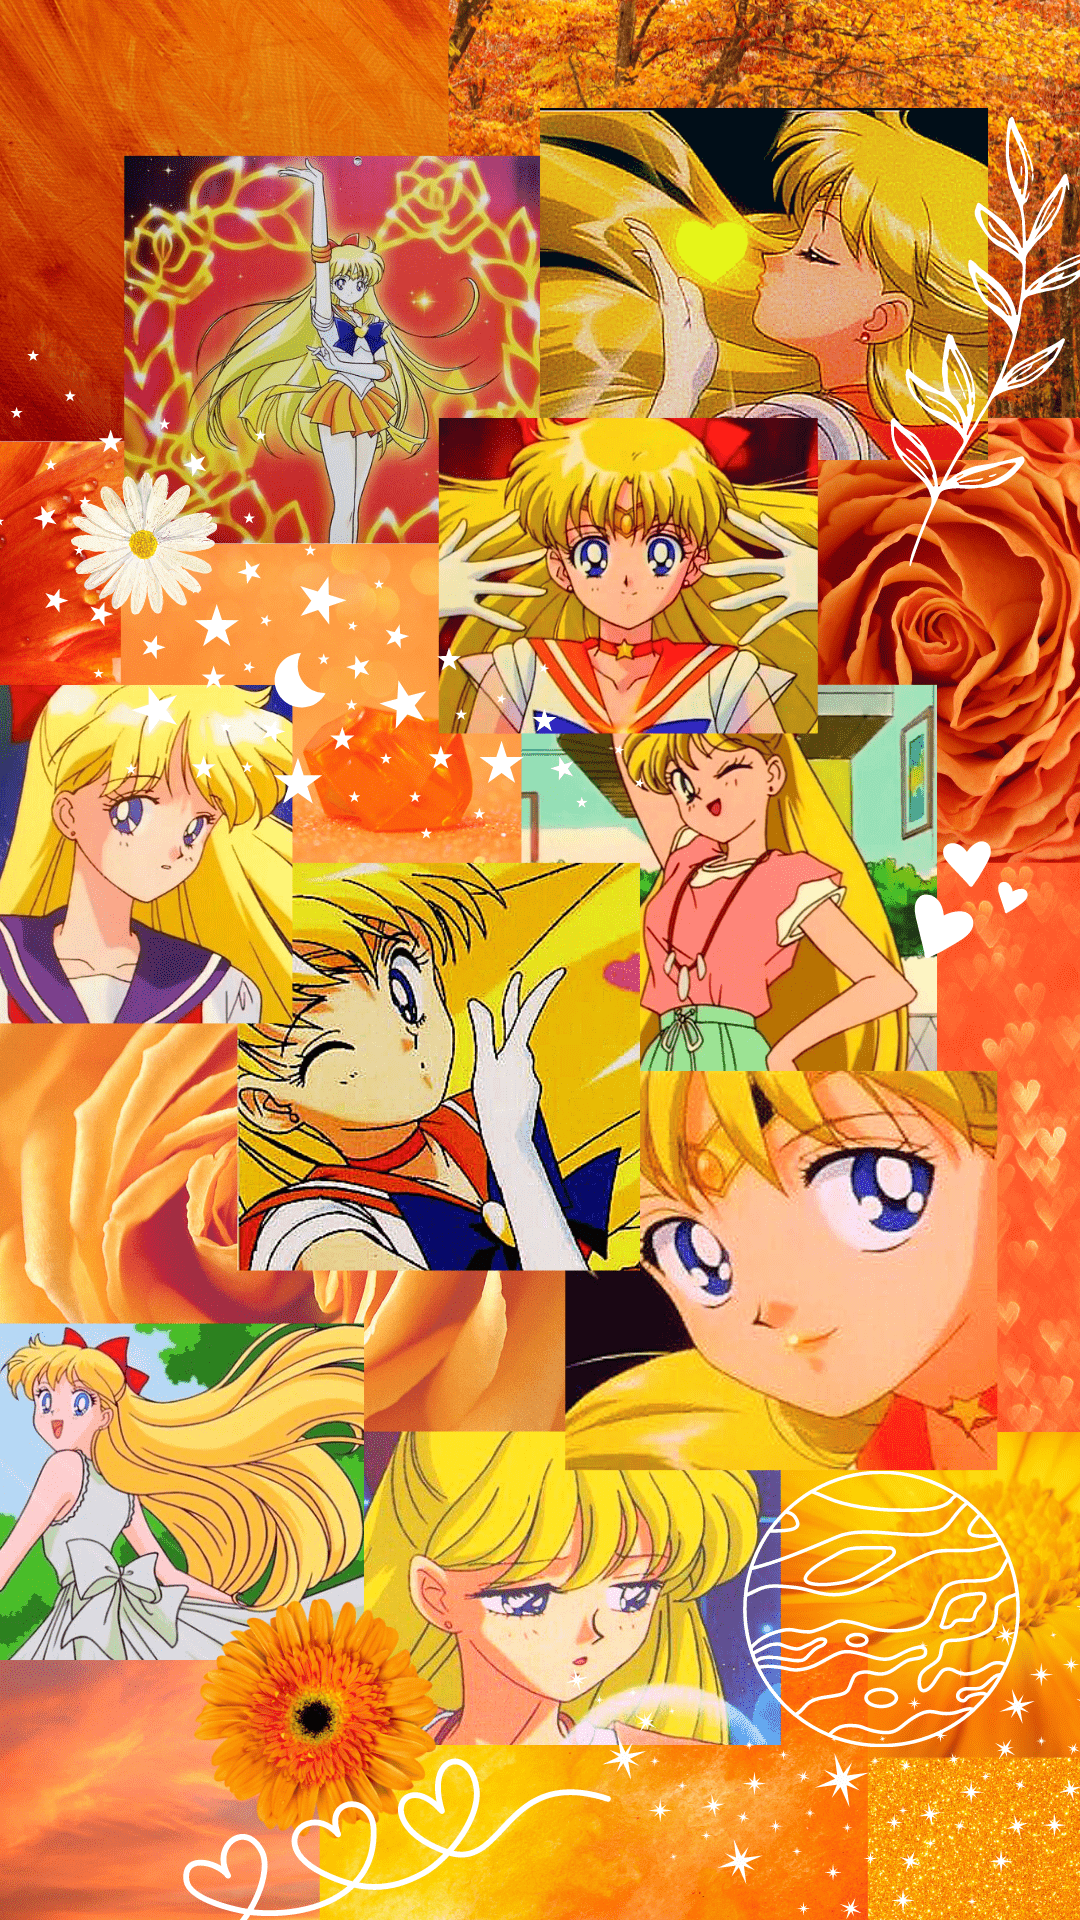 A collage of Sailor Moon images, including her in her sailor suit and transformation sequence. - Sailor Venus